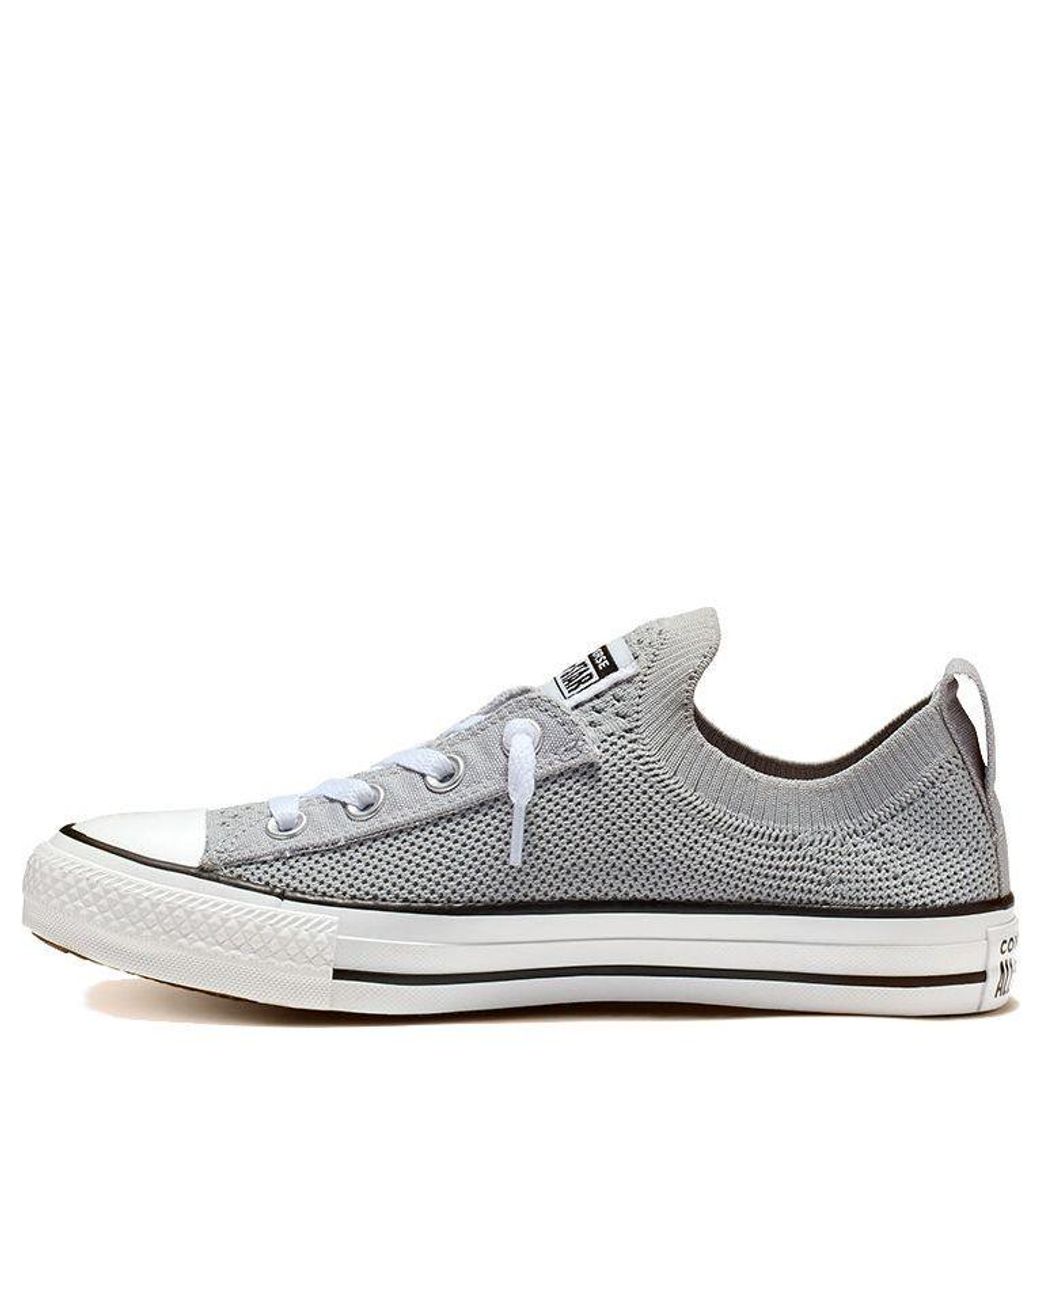 Converse Chuck Taylor All Star Shoreline Knit Slip Low Top Grey in White |  Lyst